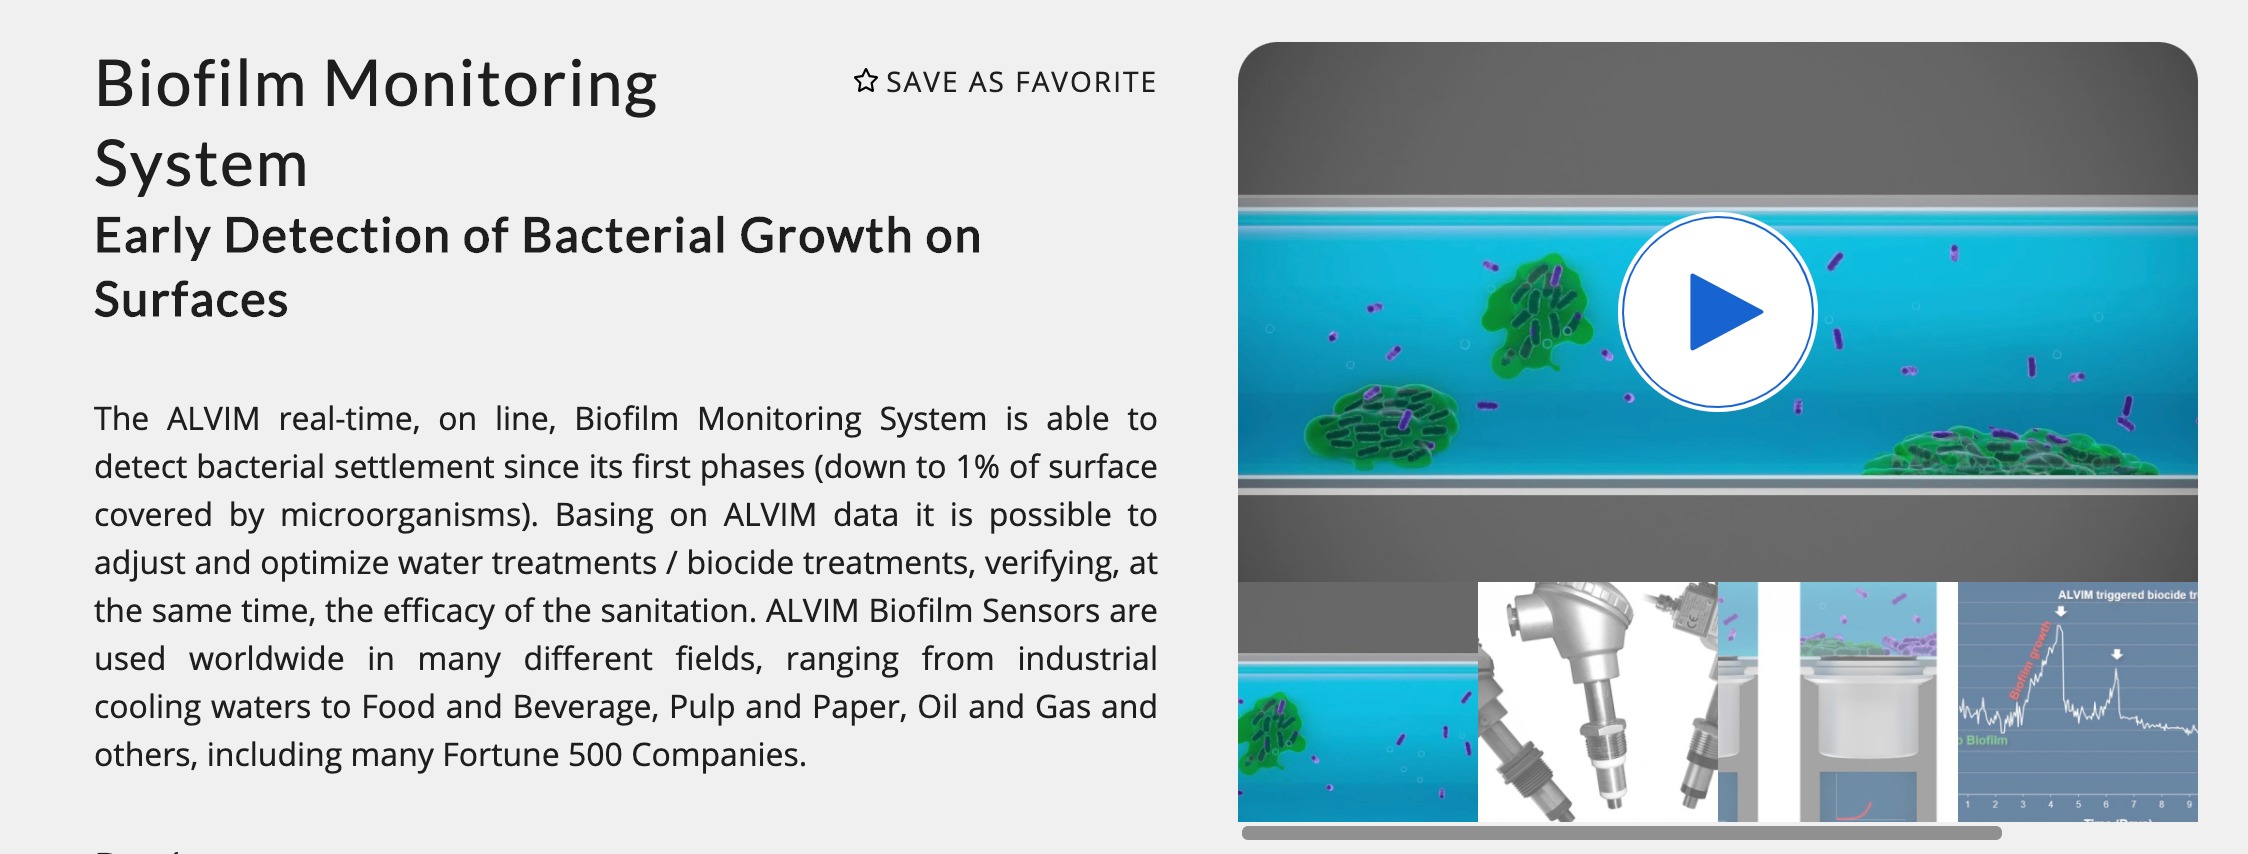 ALVIM Technology for bacteria detection featured on TechnologyCatalogue.com